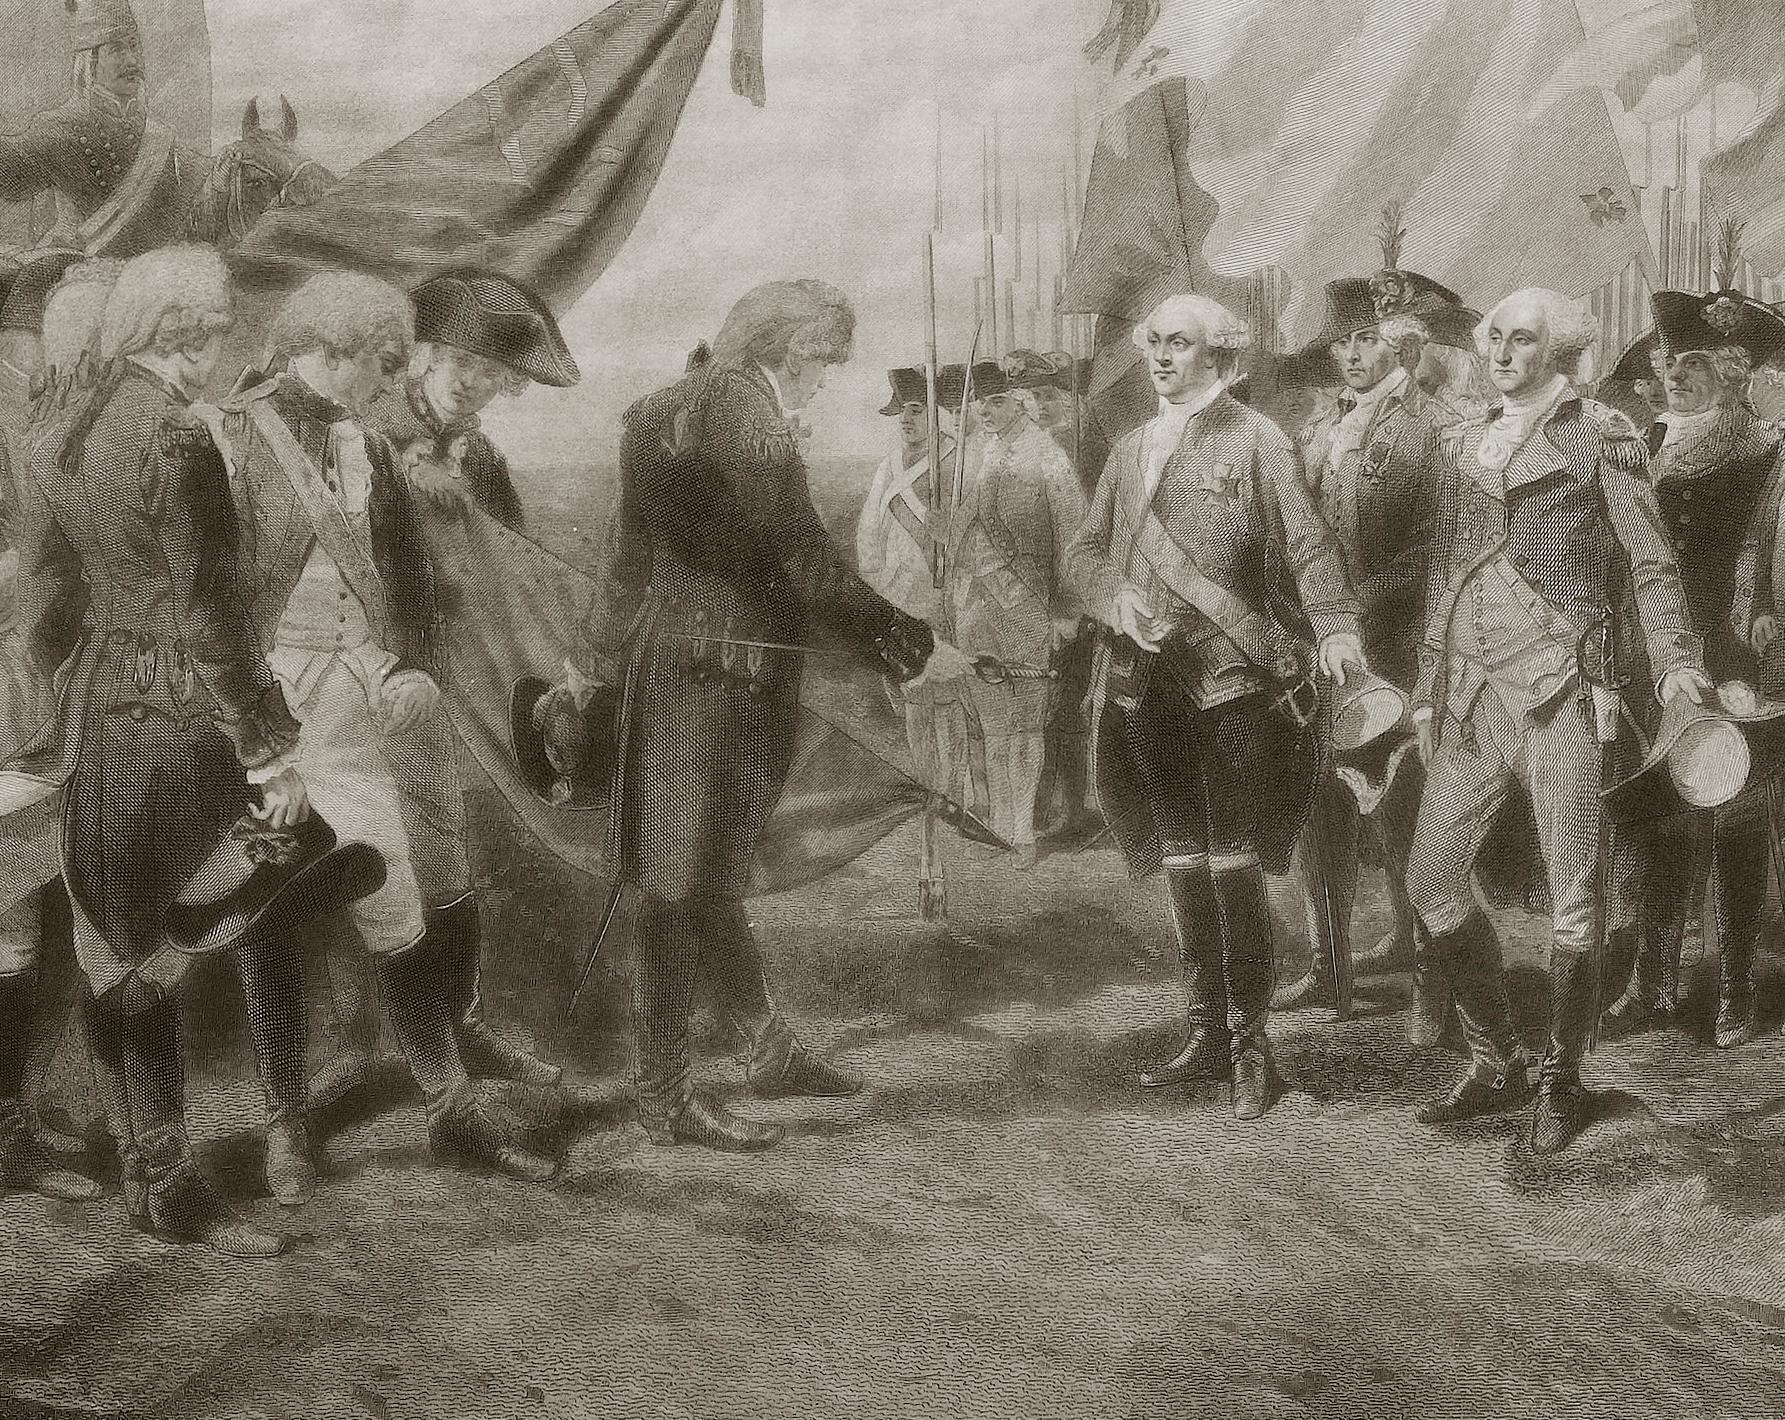 This historic print depicts the surrender of the British forces after the Battle of Yorktown. In the print, Major General O'Hara, substituting for General Cornwallis, is shown handing his sword to the Comte de Rochambeau, who is standing next to